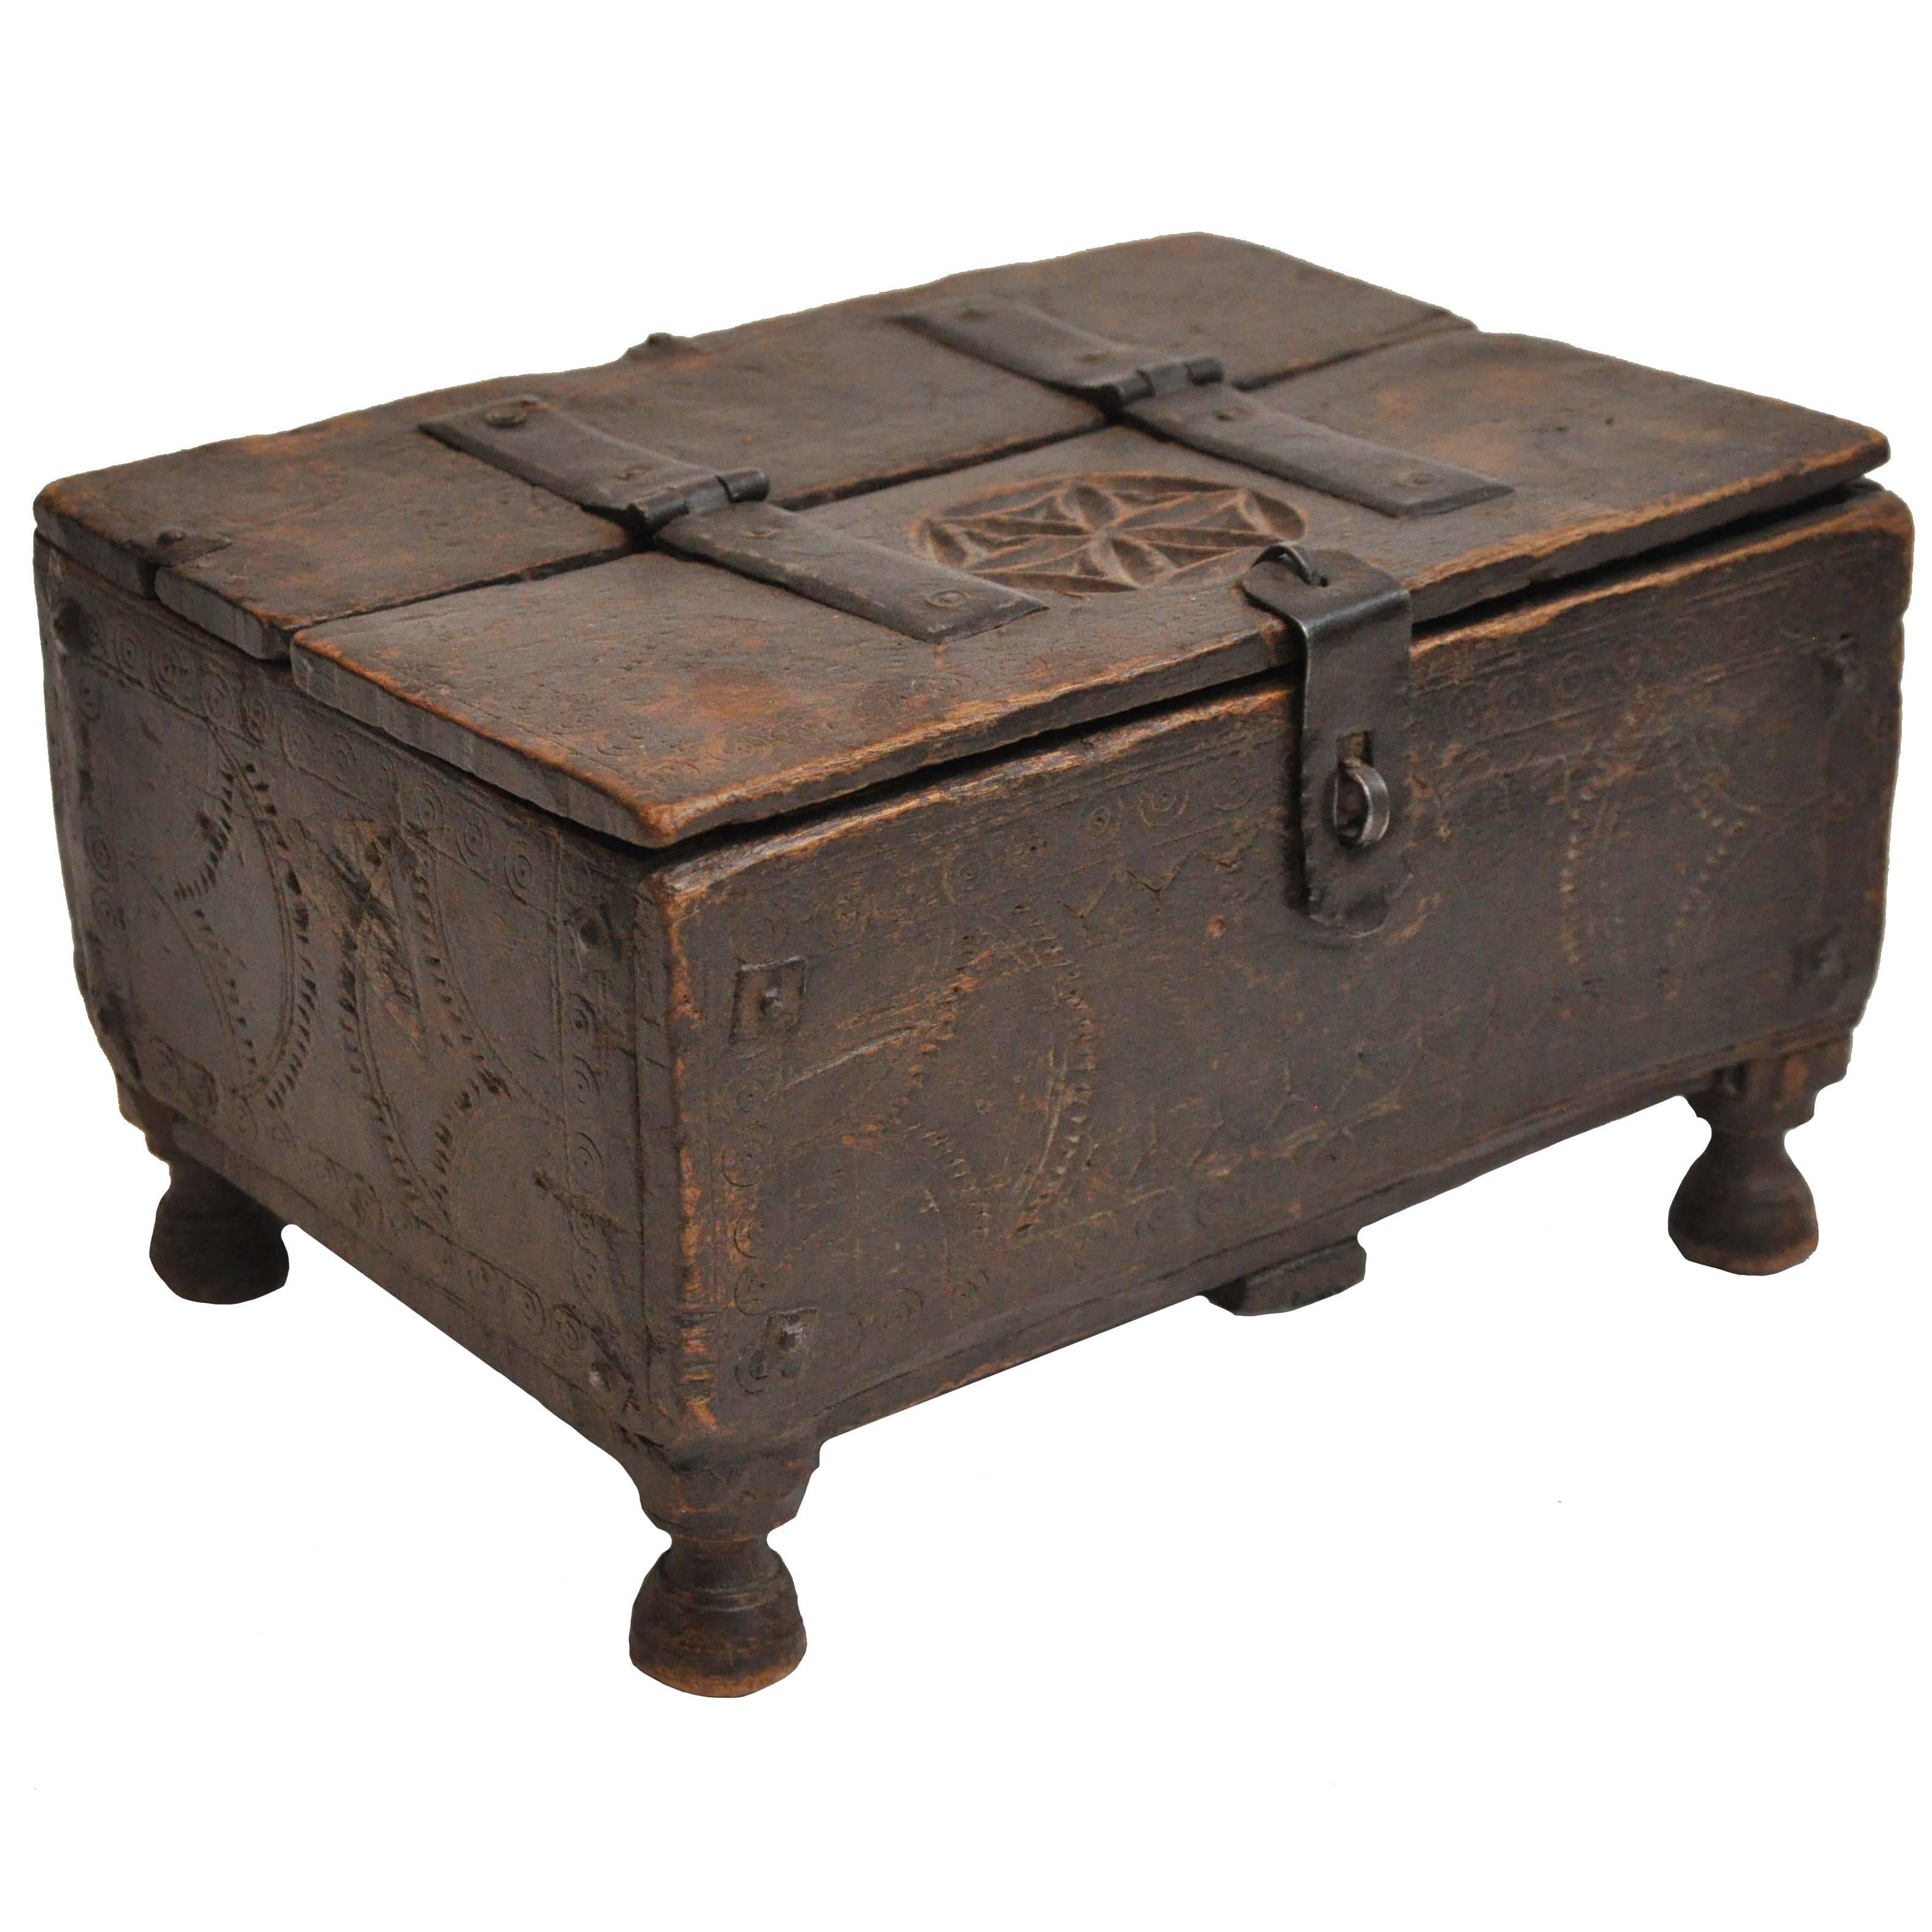 Late 19th Century Moroccan Footed Box